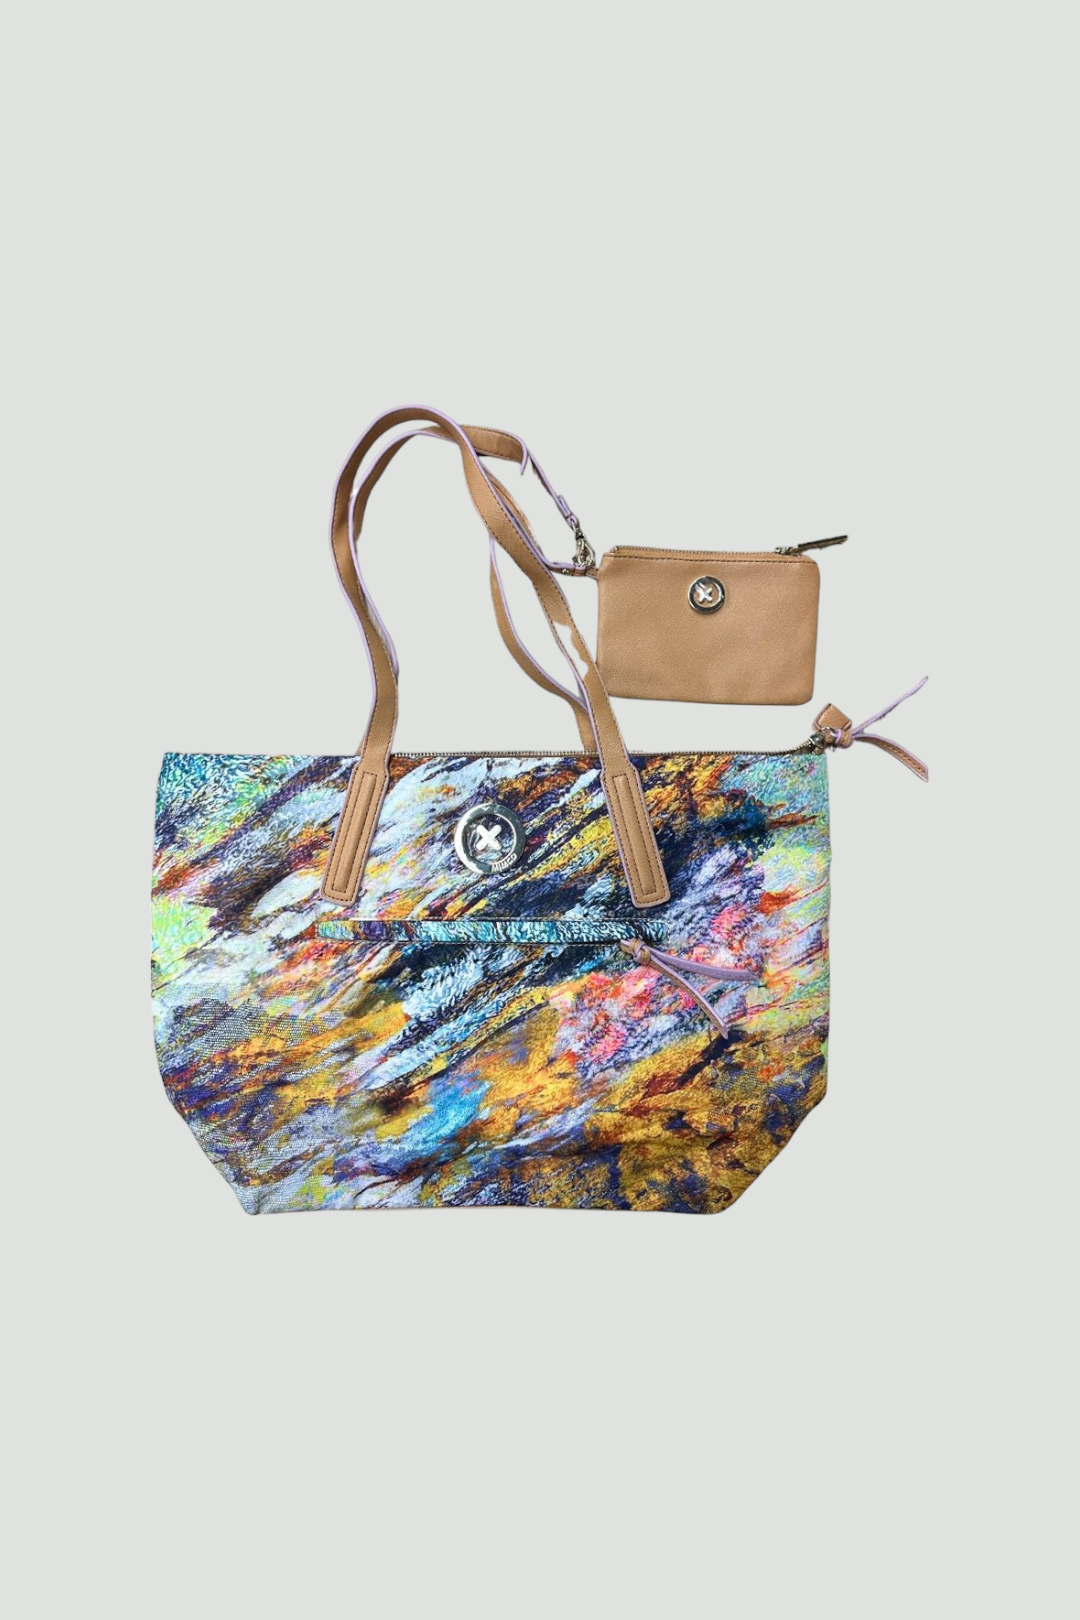 Mimco Abstract Pattern Tote Bag in Multi